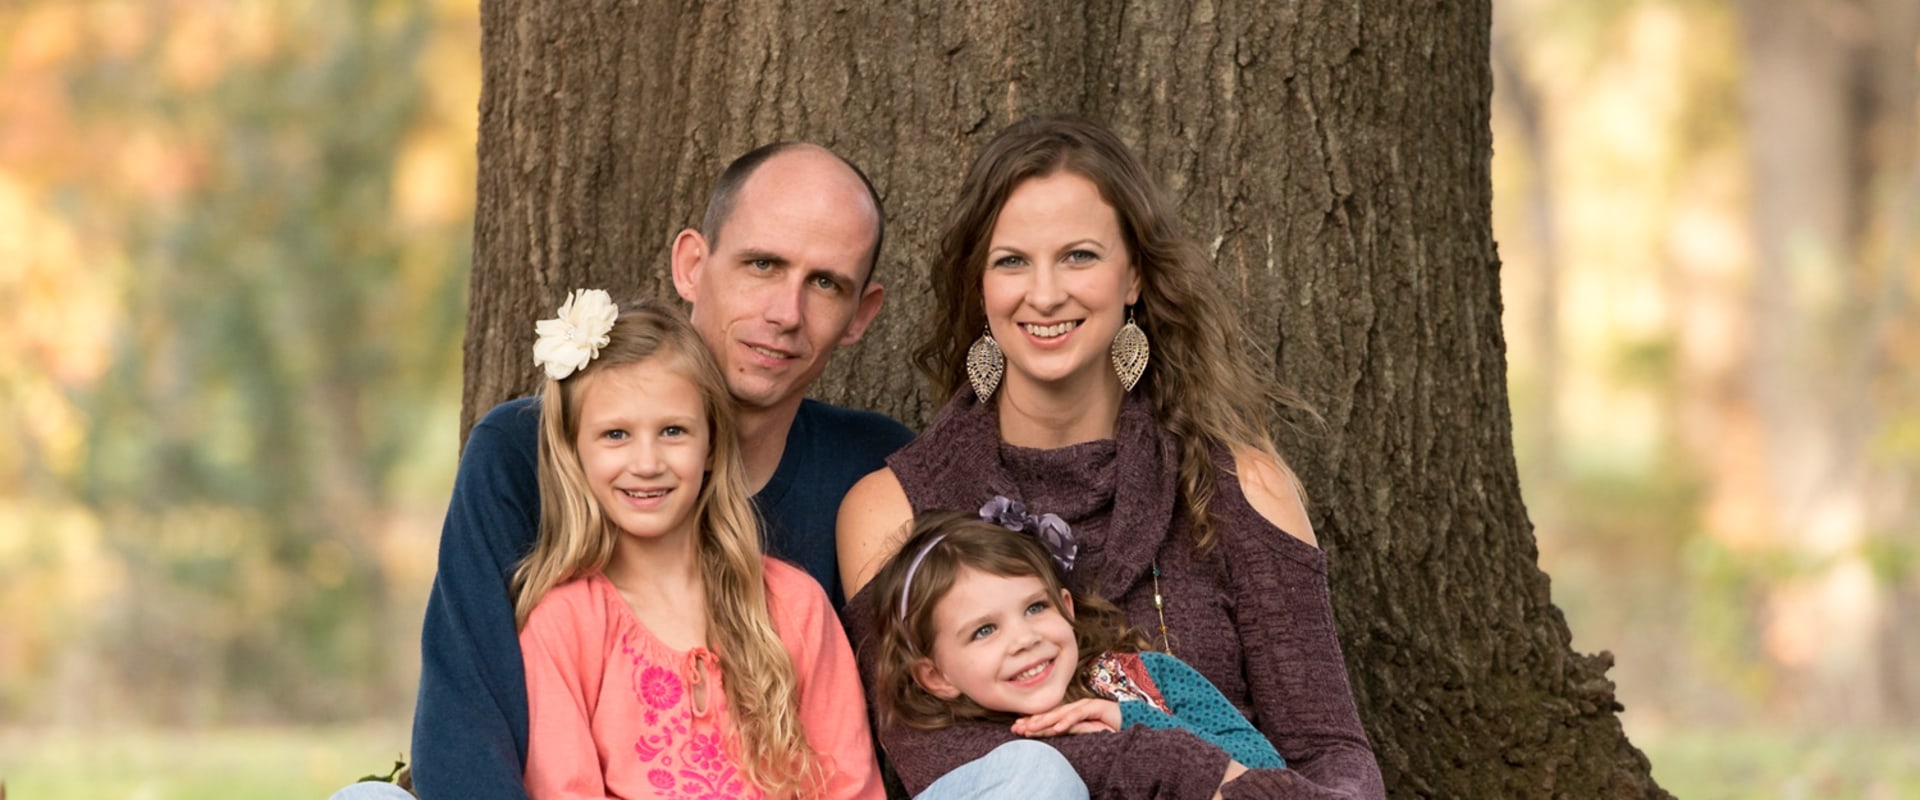 Editing Techniques for Family Portraits: A Comprehensive Overview